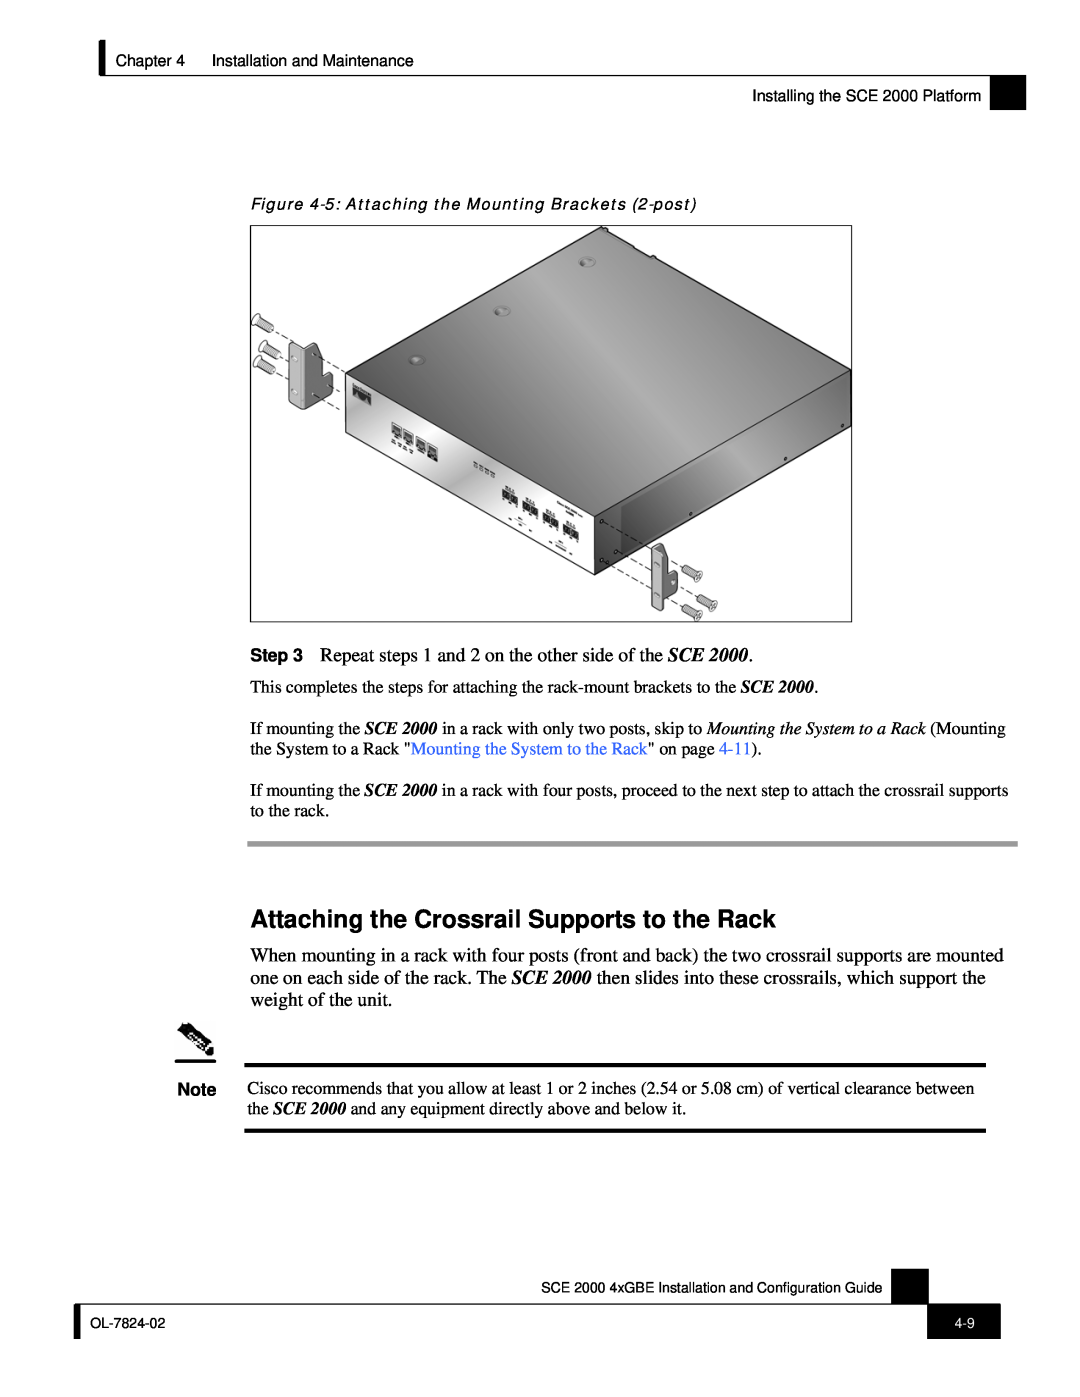 Cisco Systems SCE 2000 4xGBE manual Attaching the Crossrail Supports to the Rack 